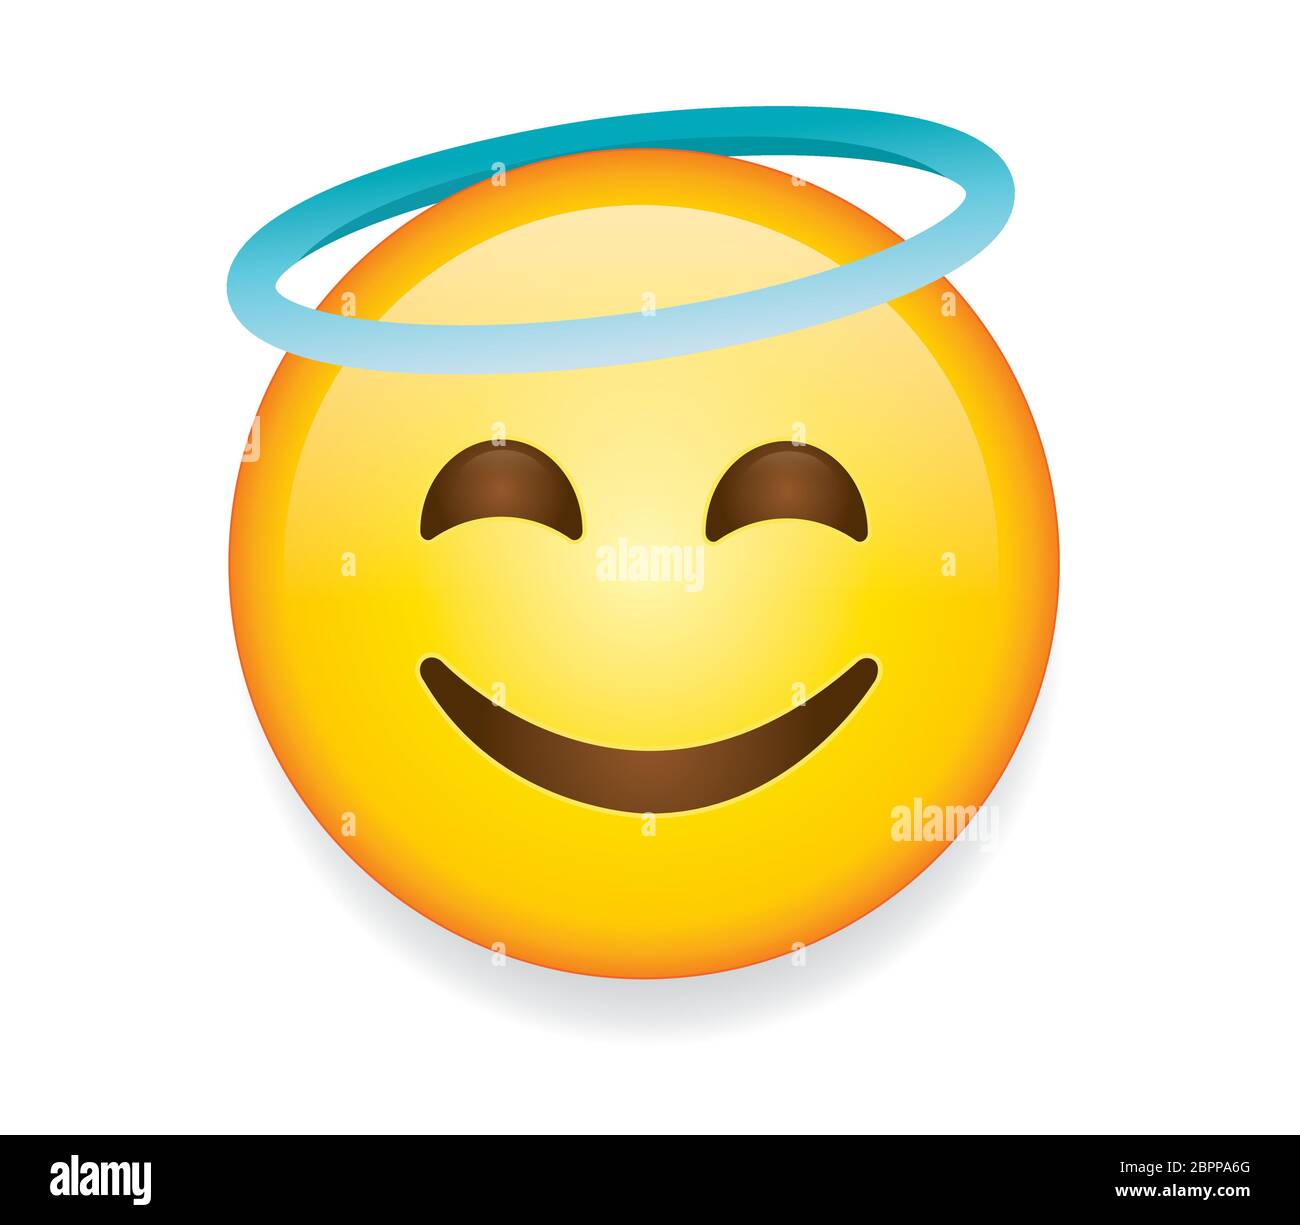 High Quality Emoticon On White Background Vector Emoji Smiling Face With Halo A Yellow Face Smiling Closed Eyes And Blue Halo Popular Chat Elements Stock Vector Image Art Alamy